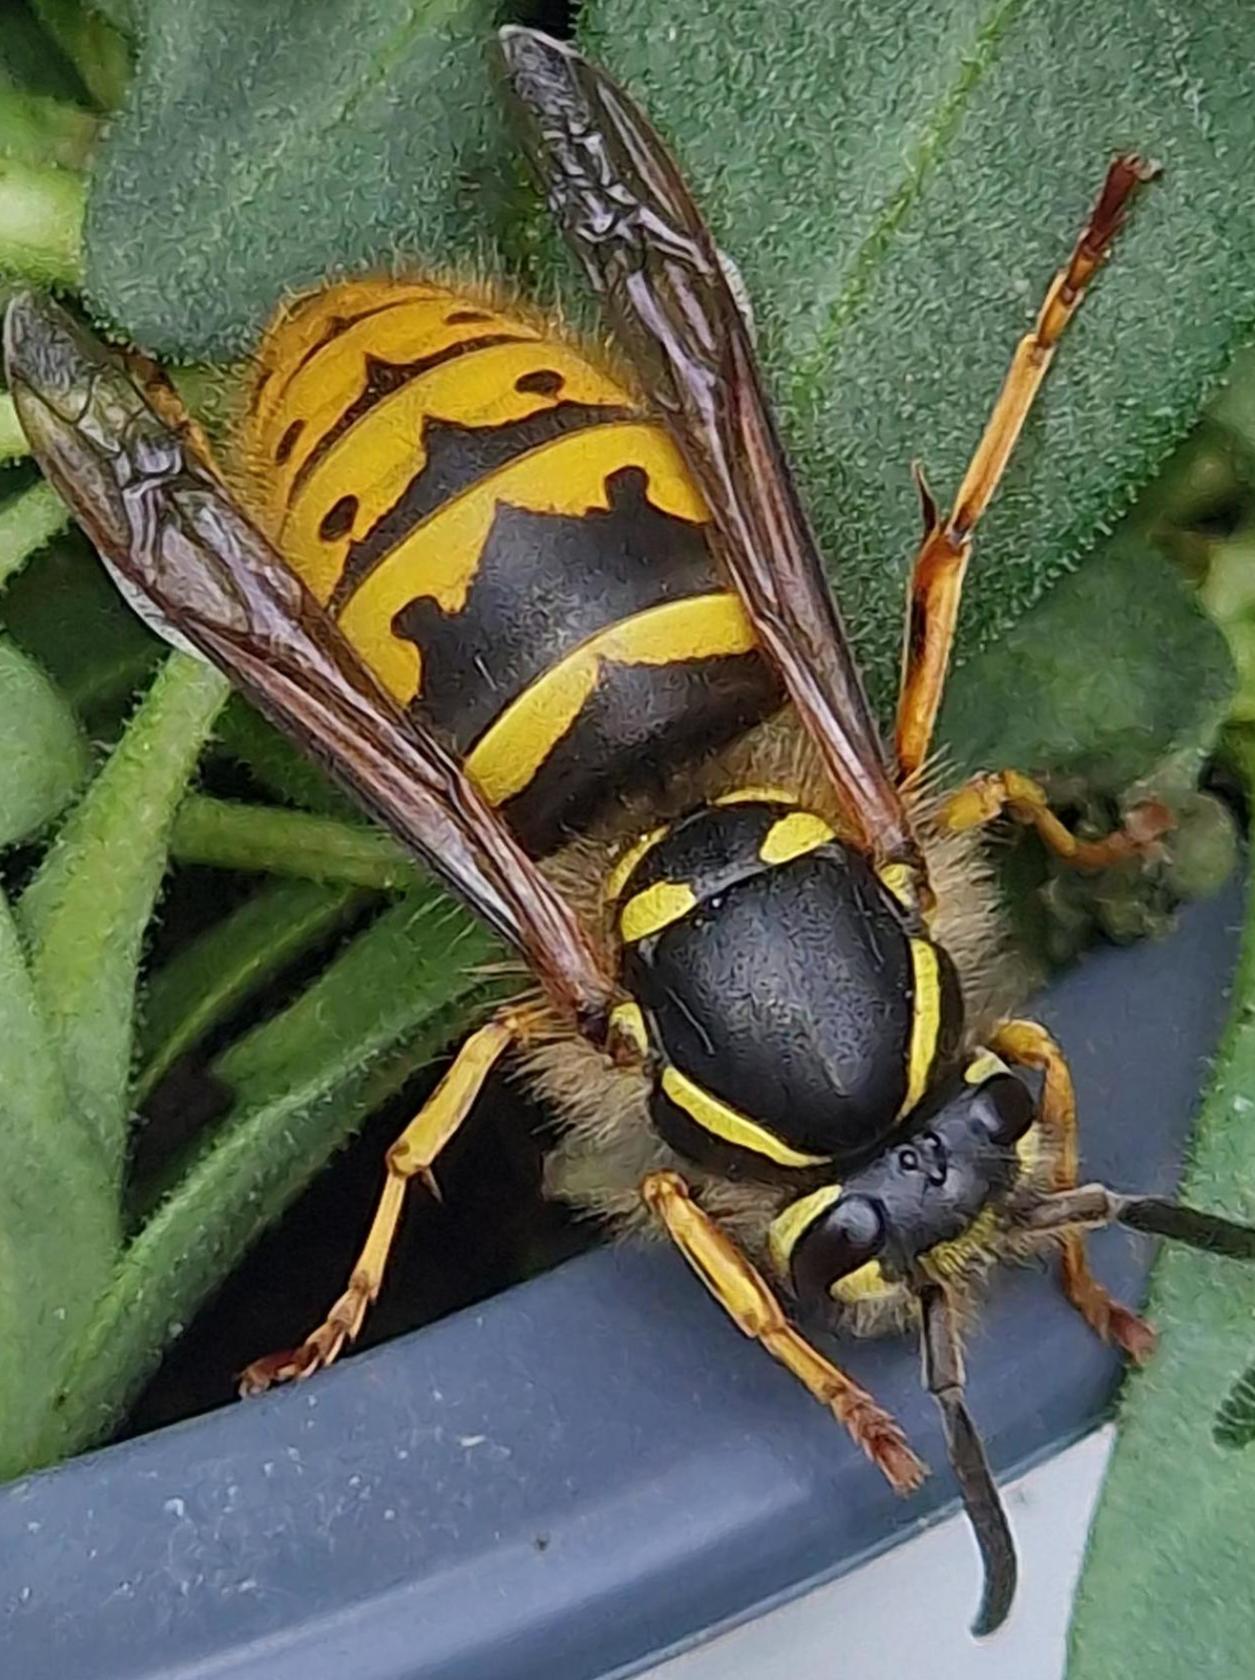 Queen wasp on a pot